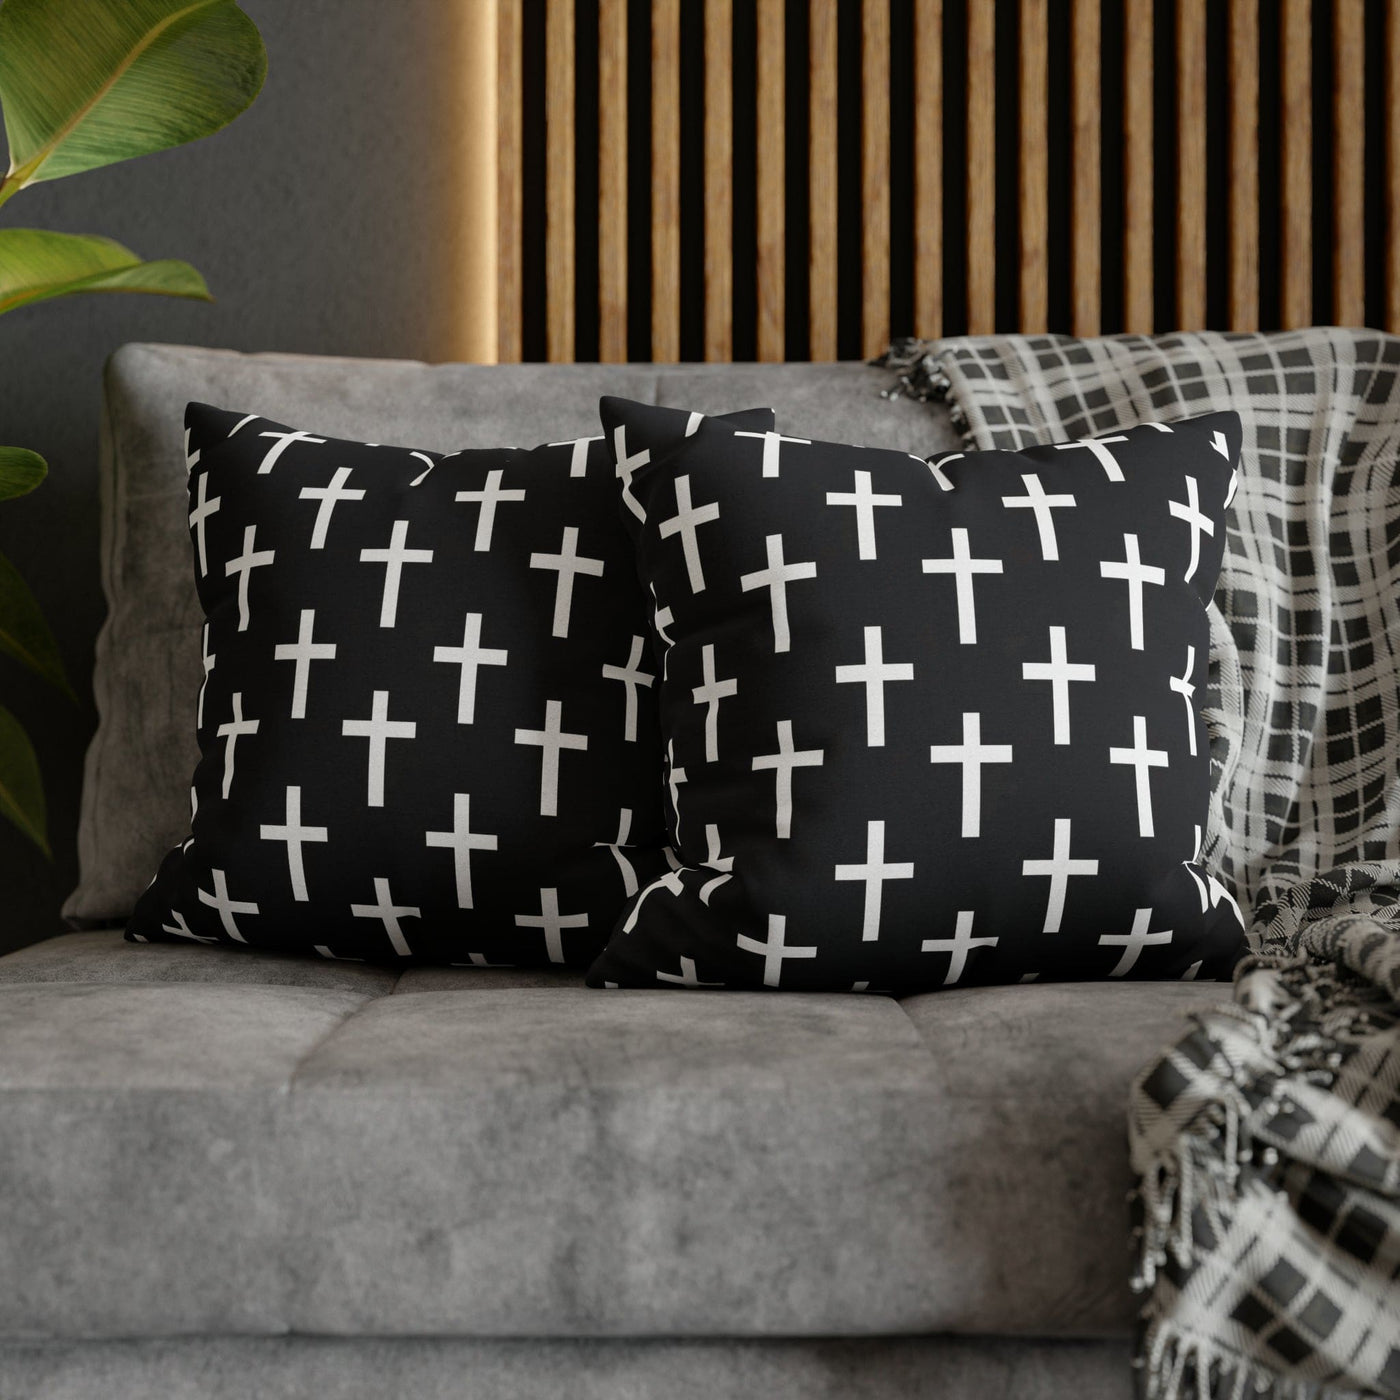 Decorative Throw Pillow Covers With Zipper - Set Of 2 Black And White Seamless